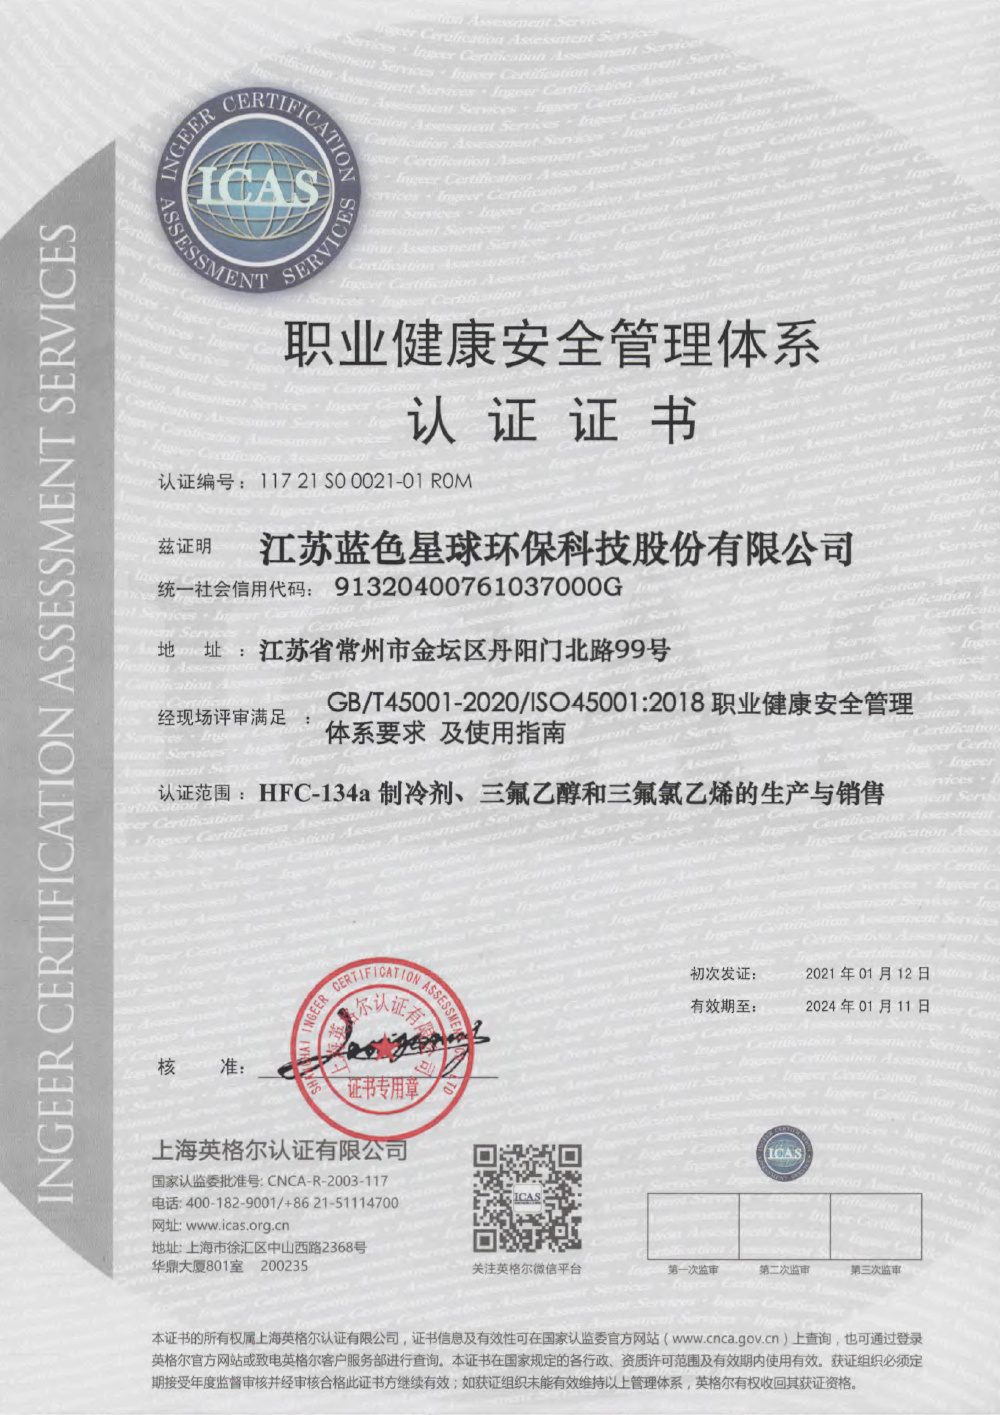 Occupational Health and Safety Management System Certificate (2021)